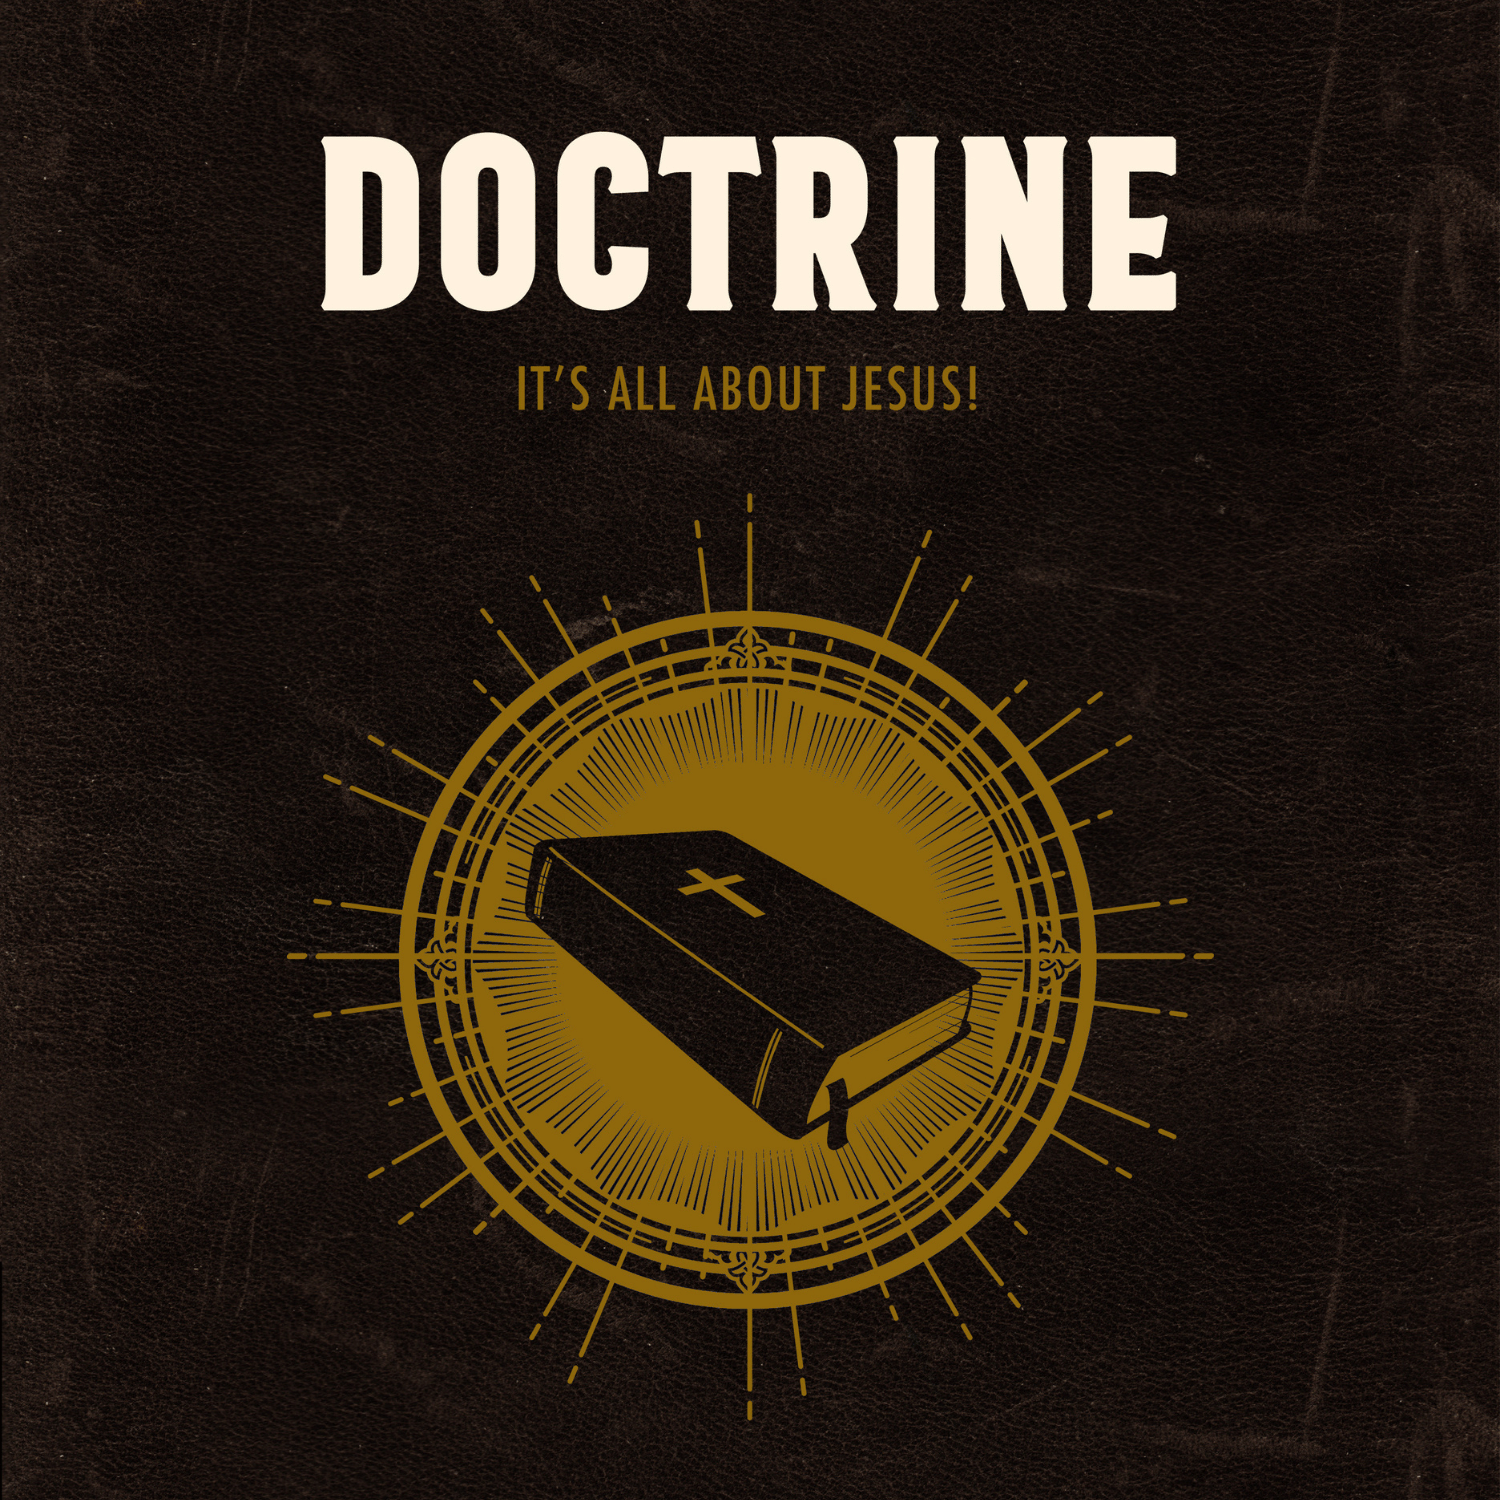 Doctrine It's all about Jesus!